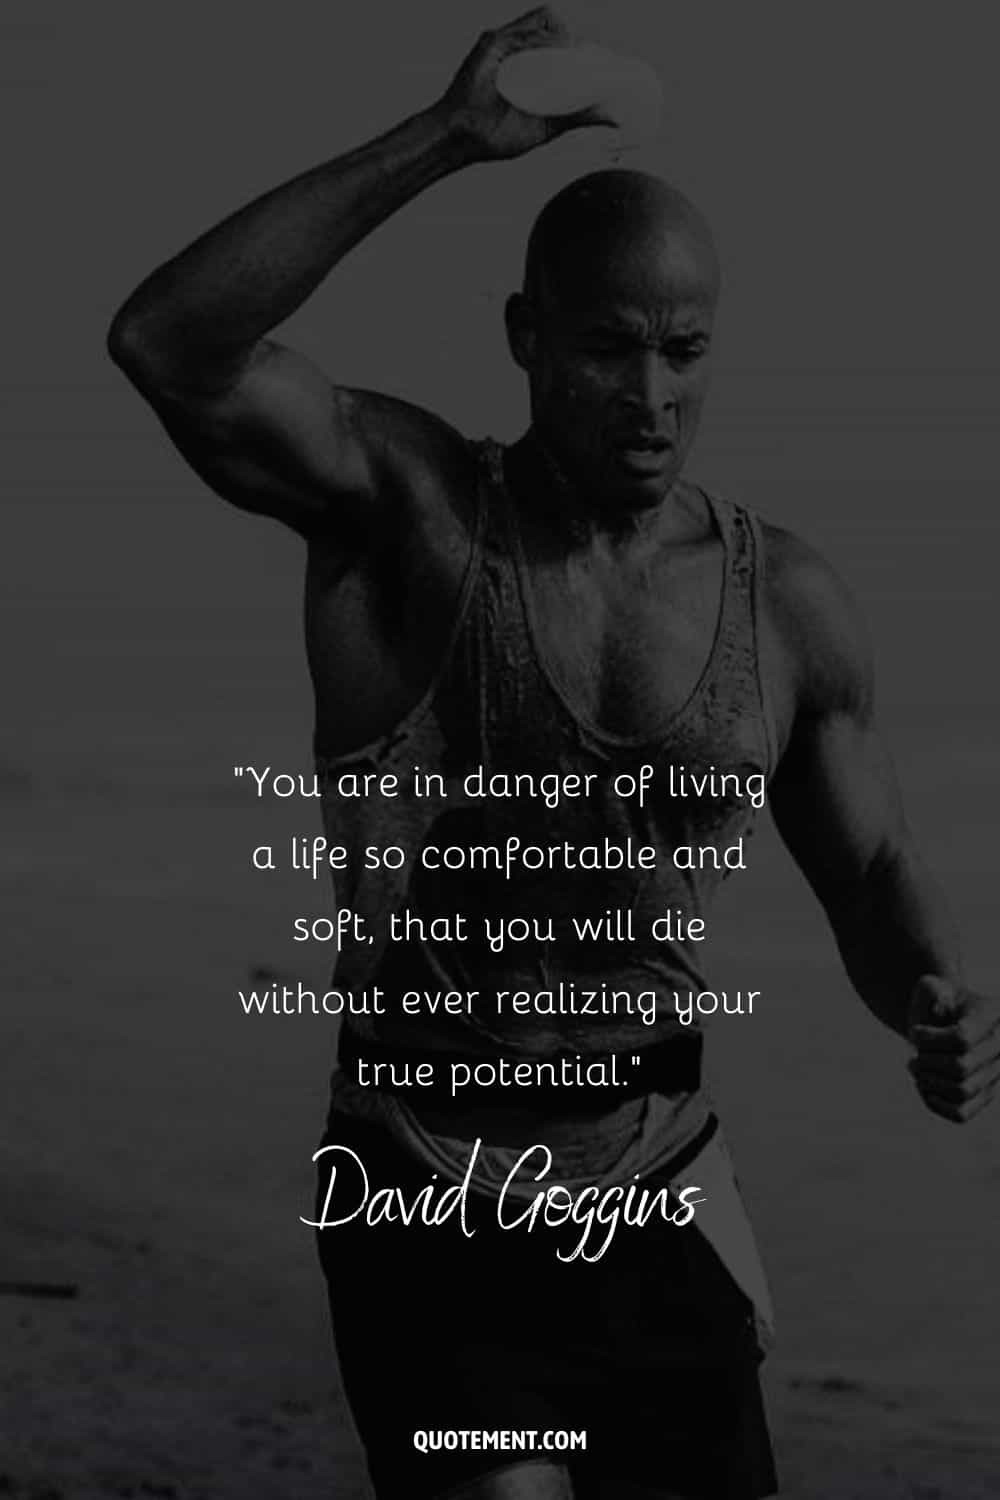 You are in danger of living a life so comfortable and soft, that you will die without ever realizing your true potential.